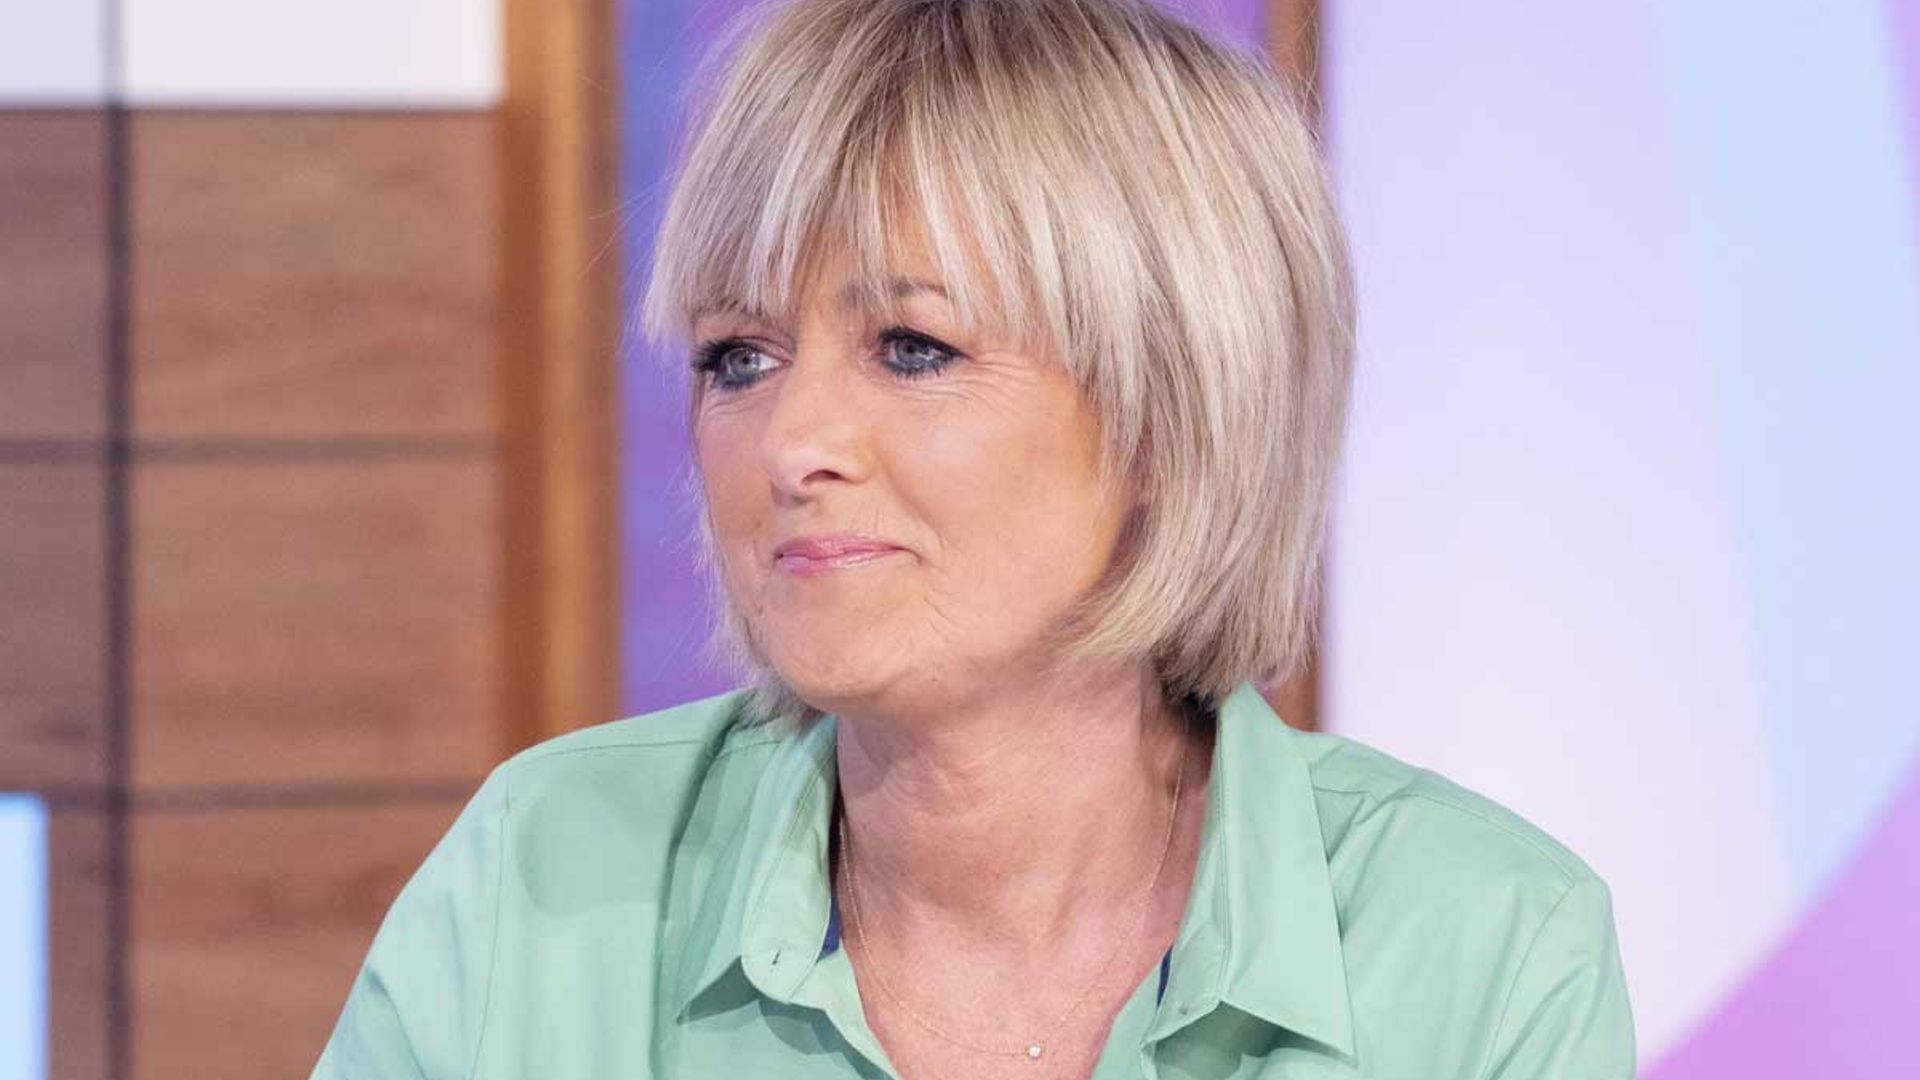 Jane Moore's chic M&S shirt dress is just £22 in the sale - but it's selling quickly